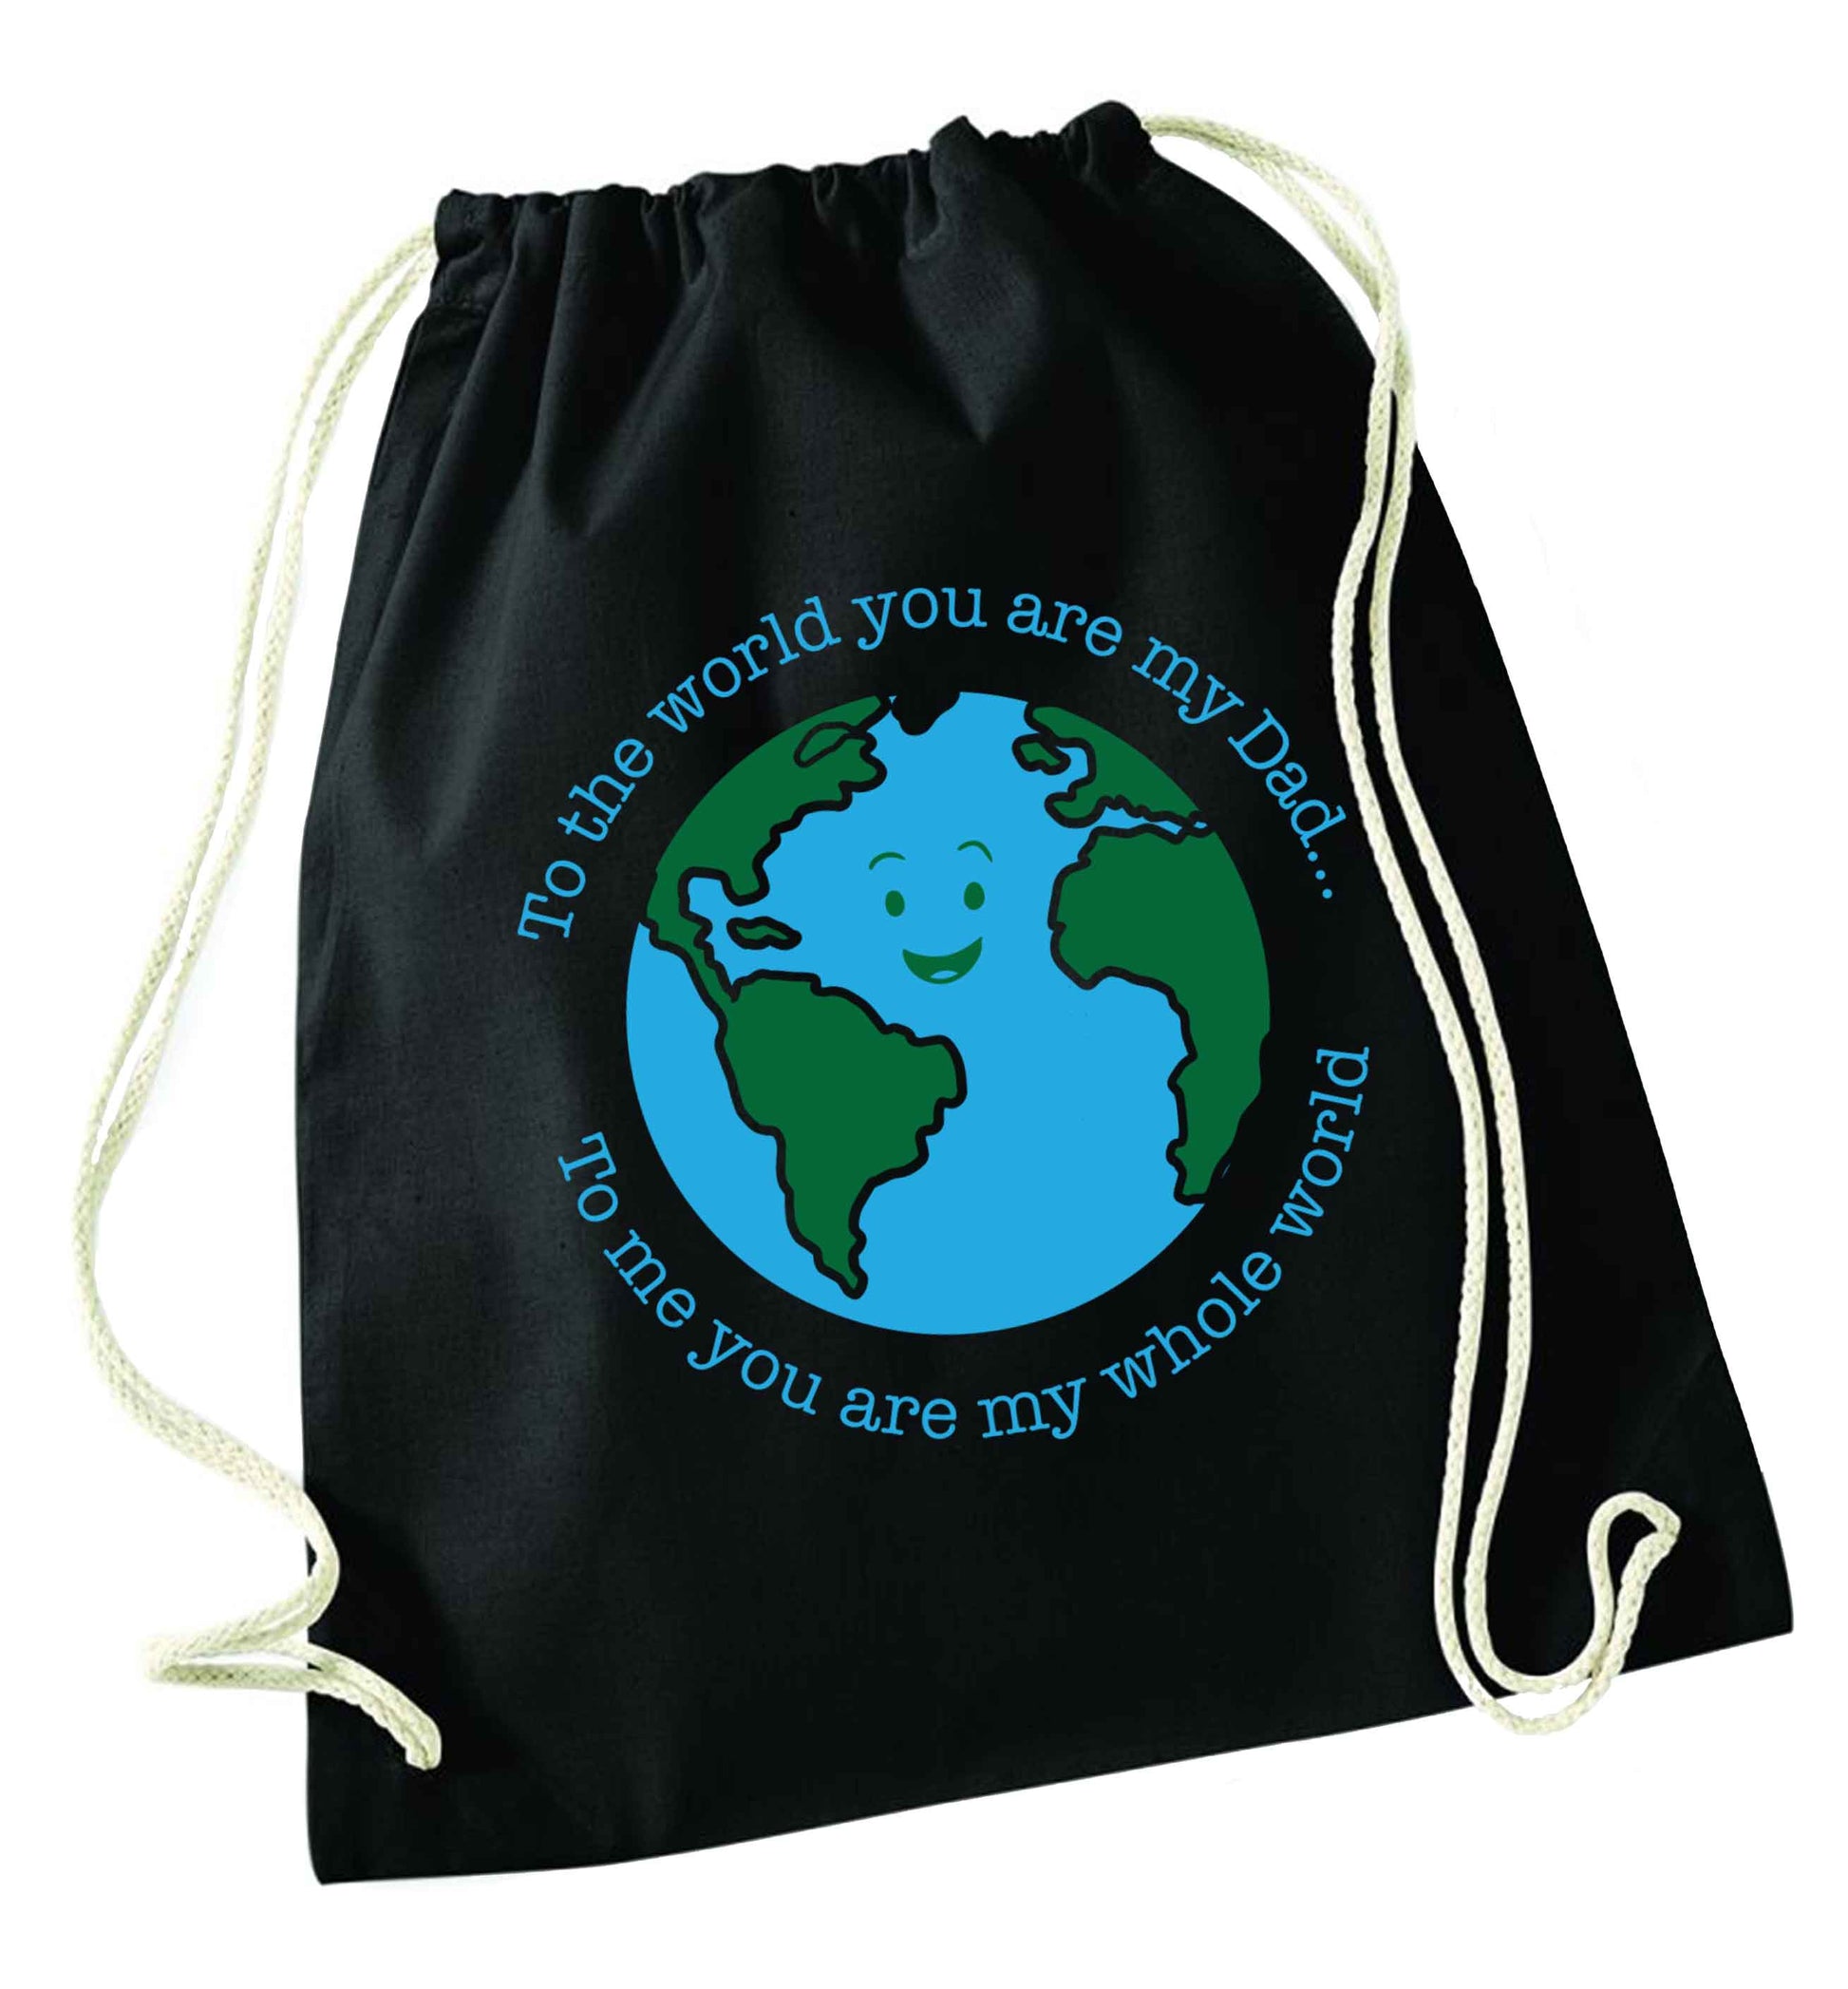 To the world you are my dad, to me you are my whole world black drawstring bag